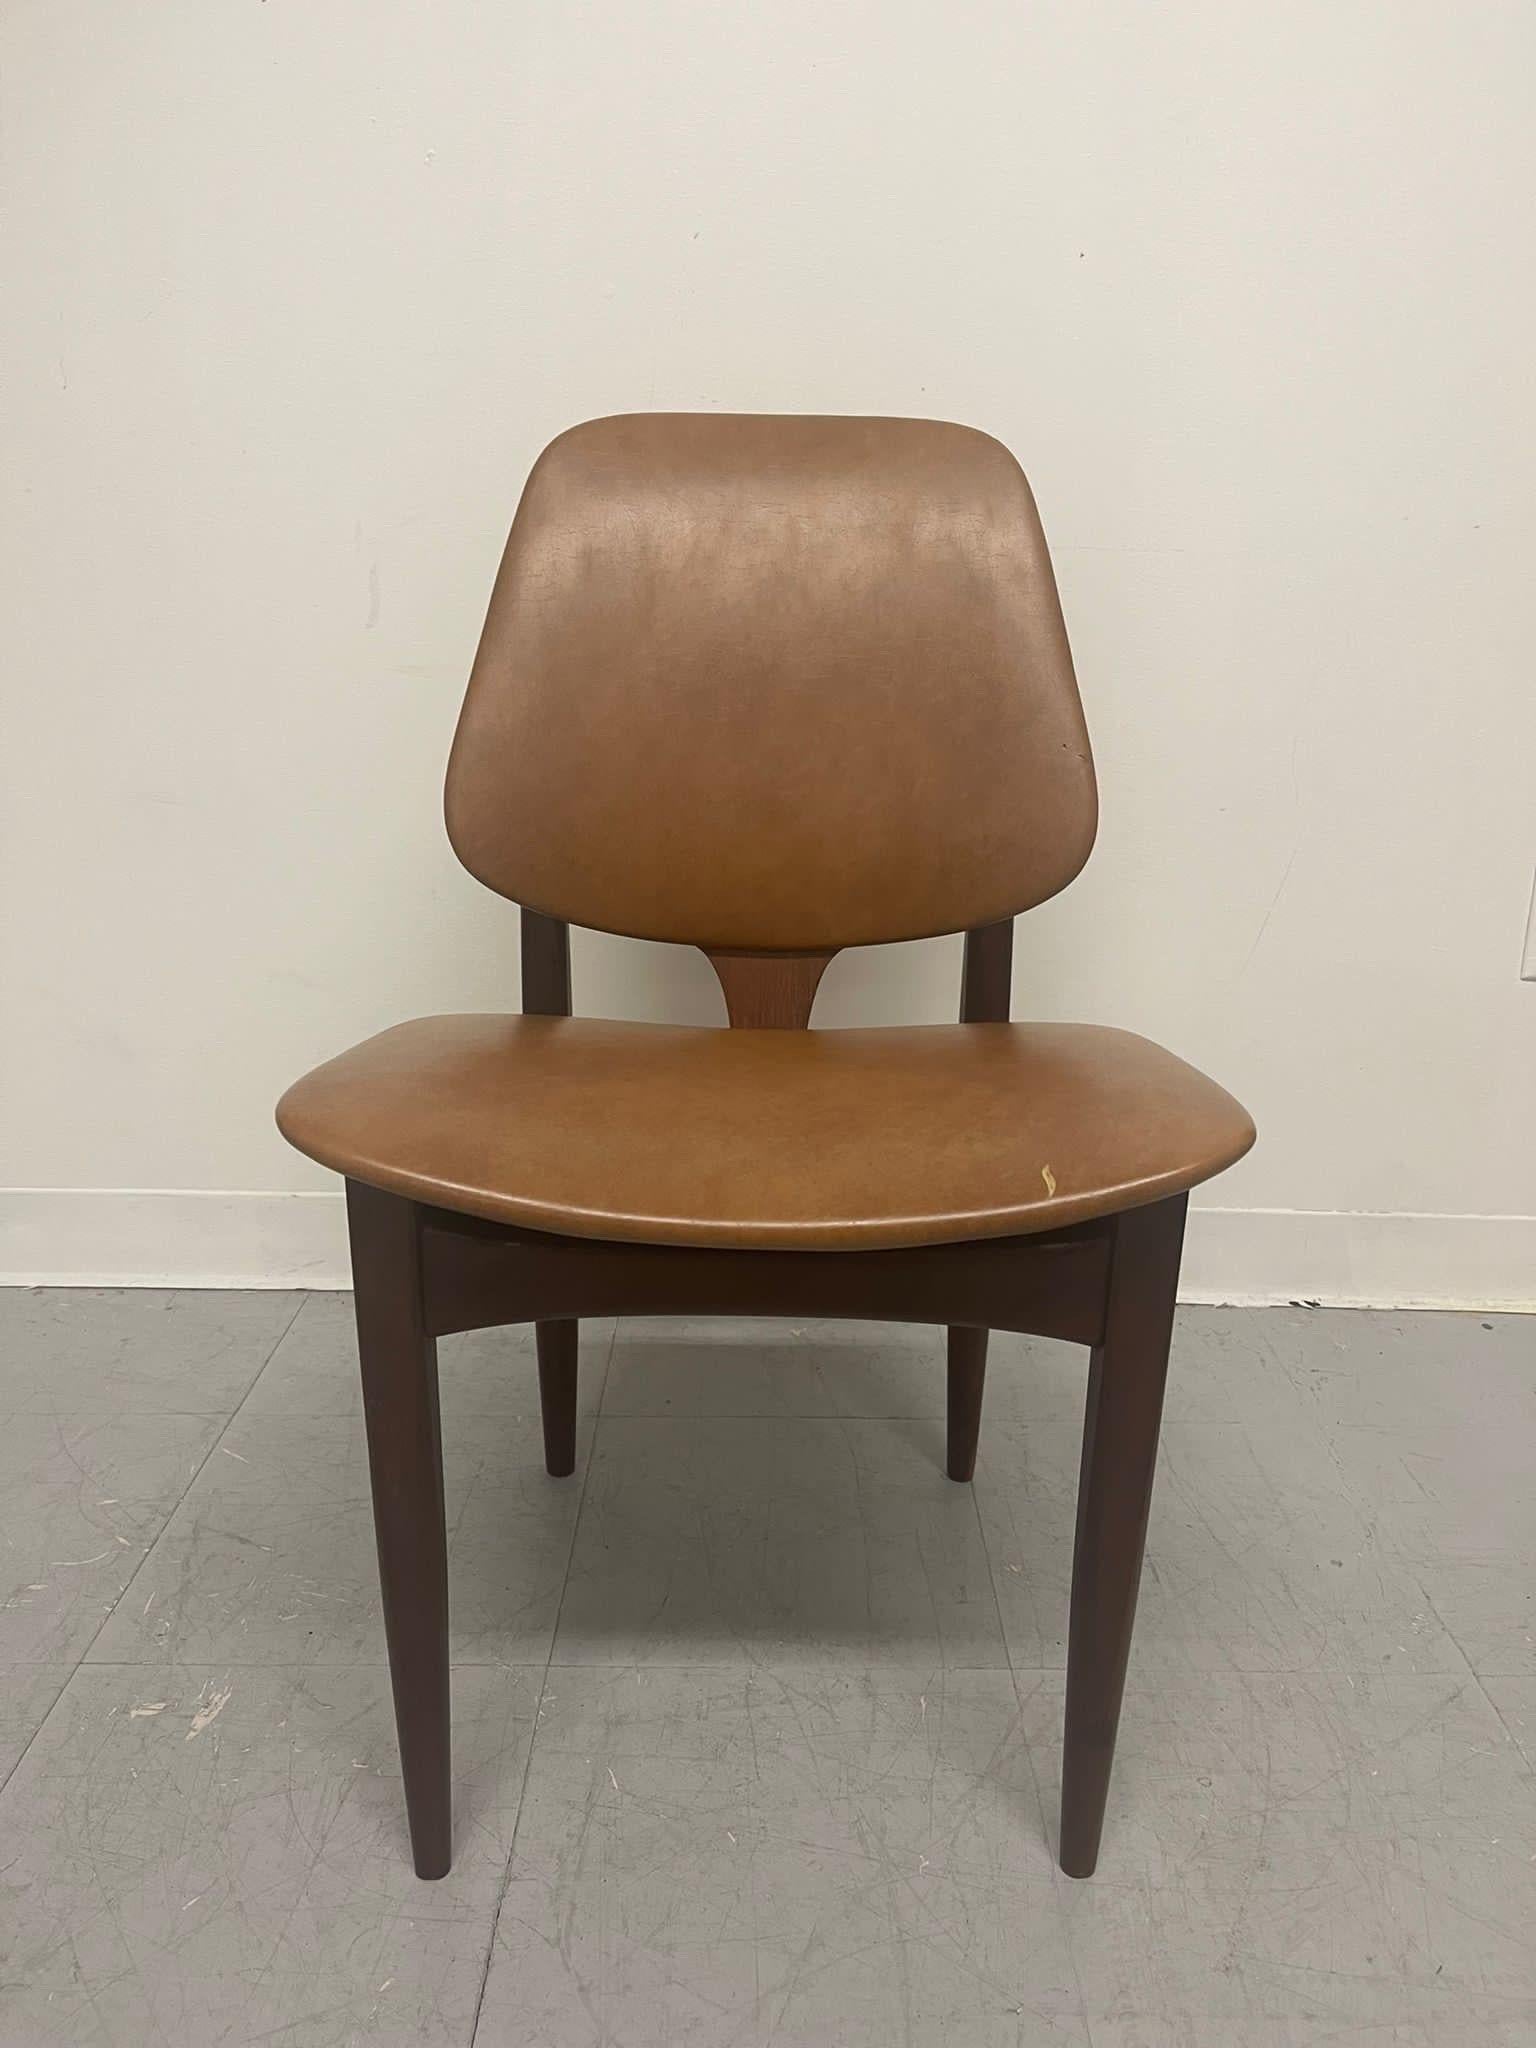 Possibly Leather or Vinyl Seat Covering. Possibly Elliot’s of Newbury , No Makers Mark. Circa 1960s- 1970s. Vintage Condition Consistent with Age as Pictured.

Dimensions. 19 W ; 20 D ; 31 H